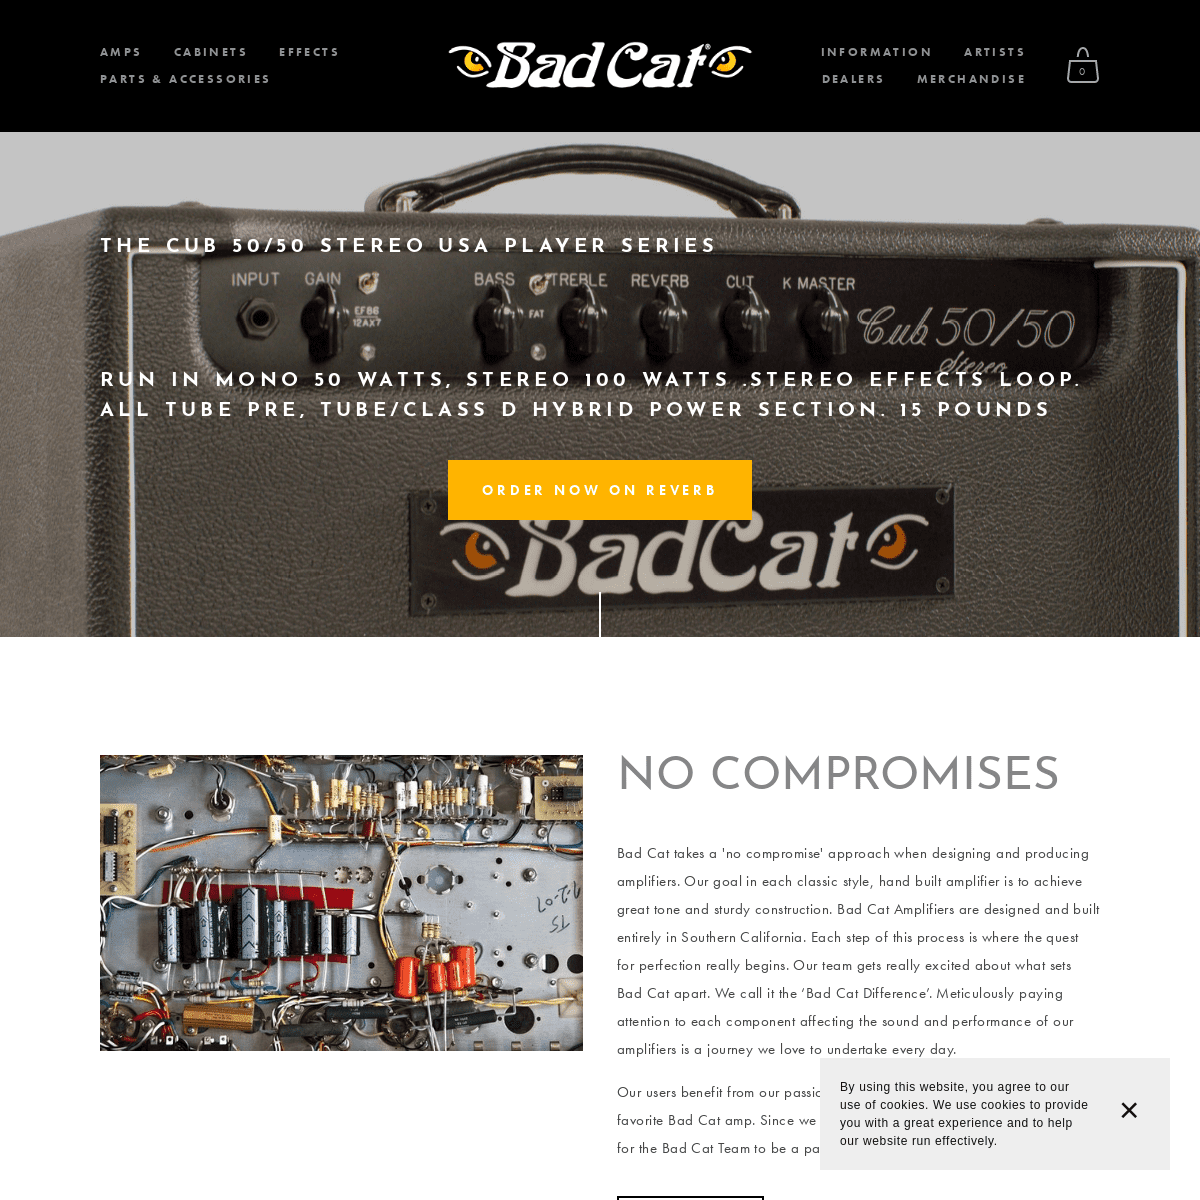 A complete backup of badcatamps.com